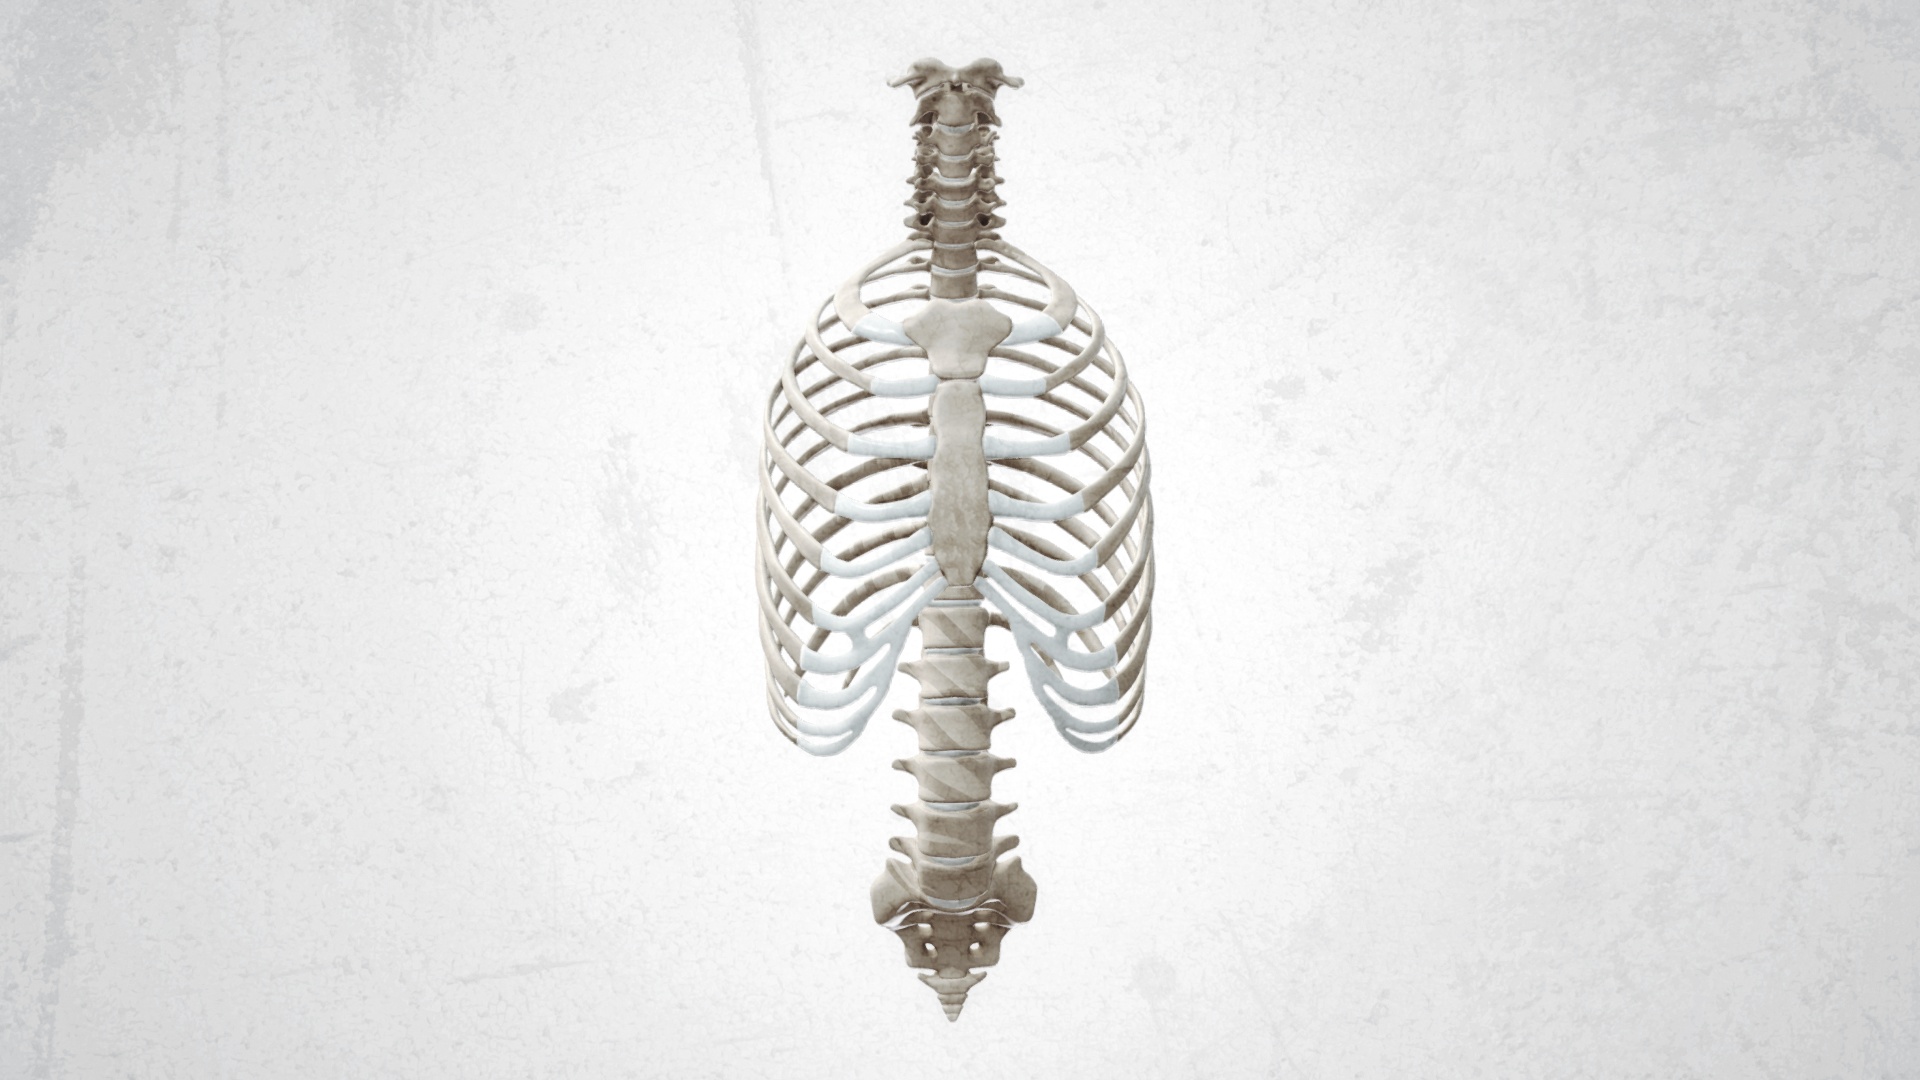 Ribcage with spine and humerii